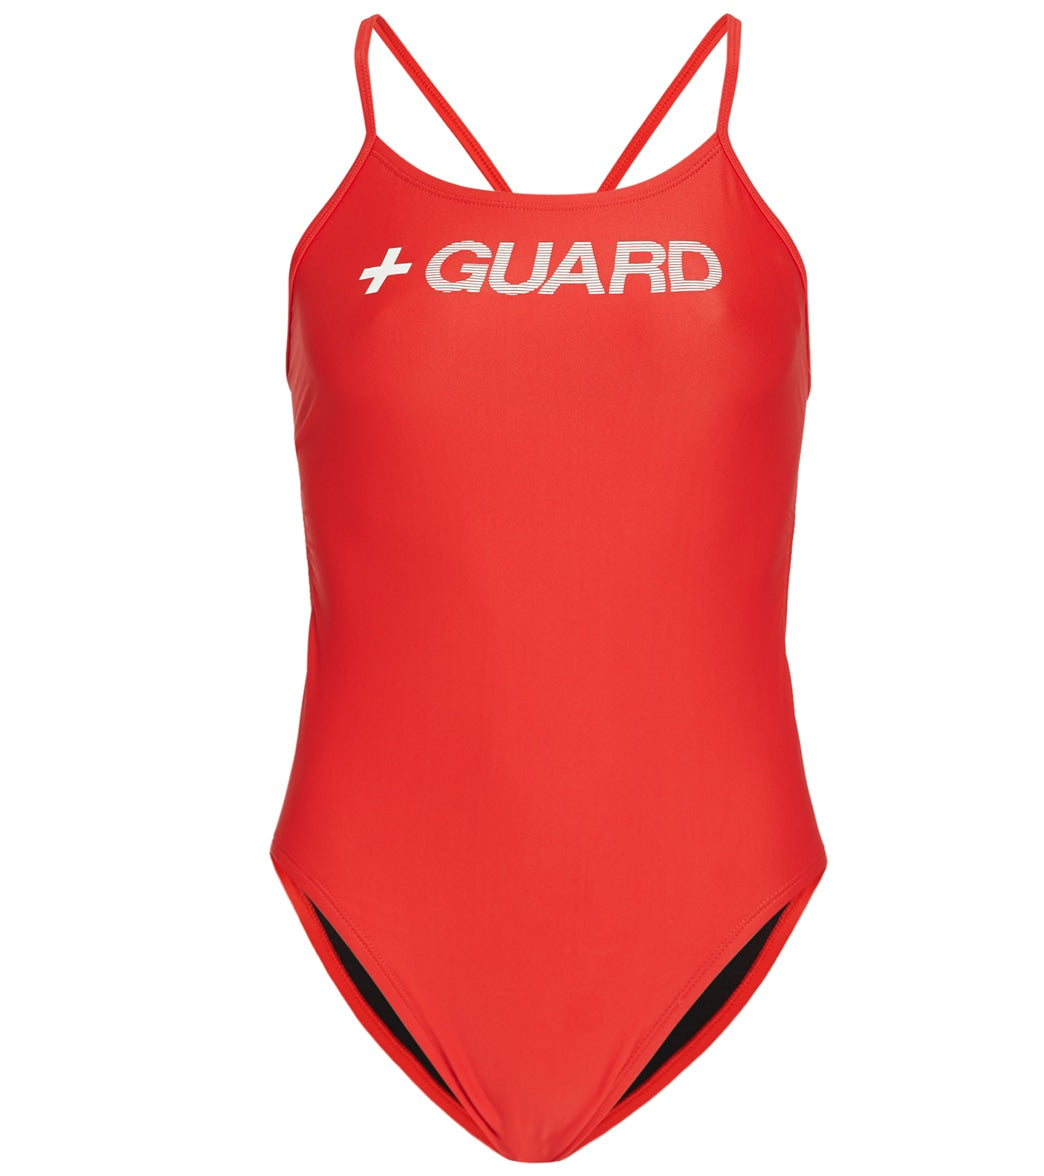 Nike Women's Lifeguard Cut Out Tank One Piece Swimsuit at SwimOutlet.com